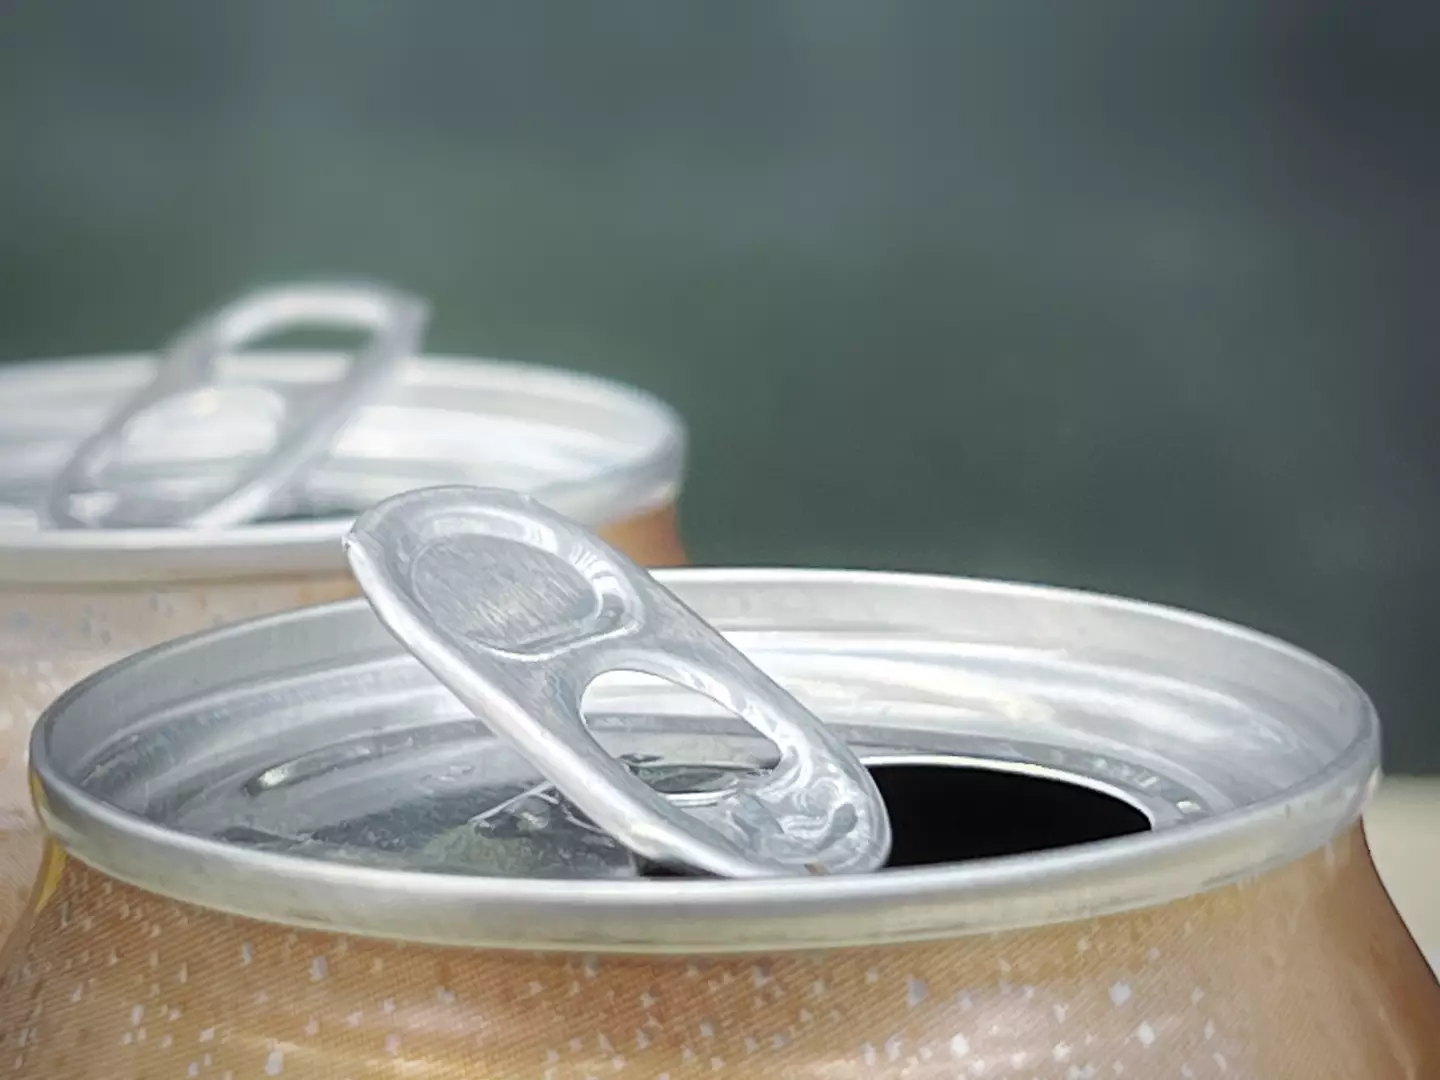 Cans weren't always like this (Getty Stock Image/Calvin Chan Wai Meng)